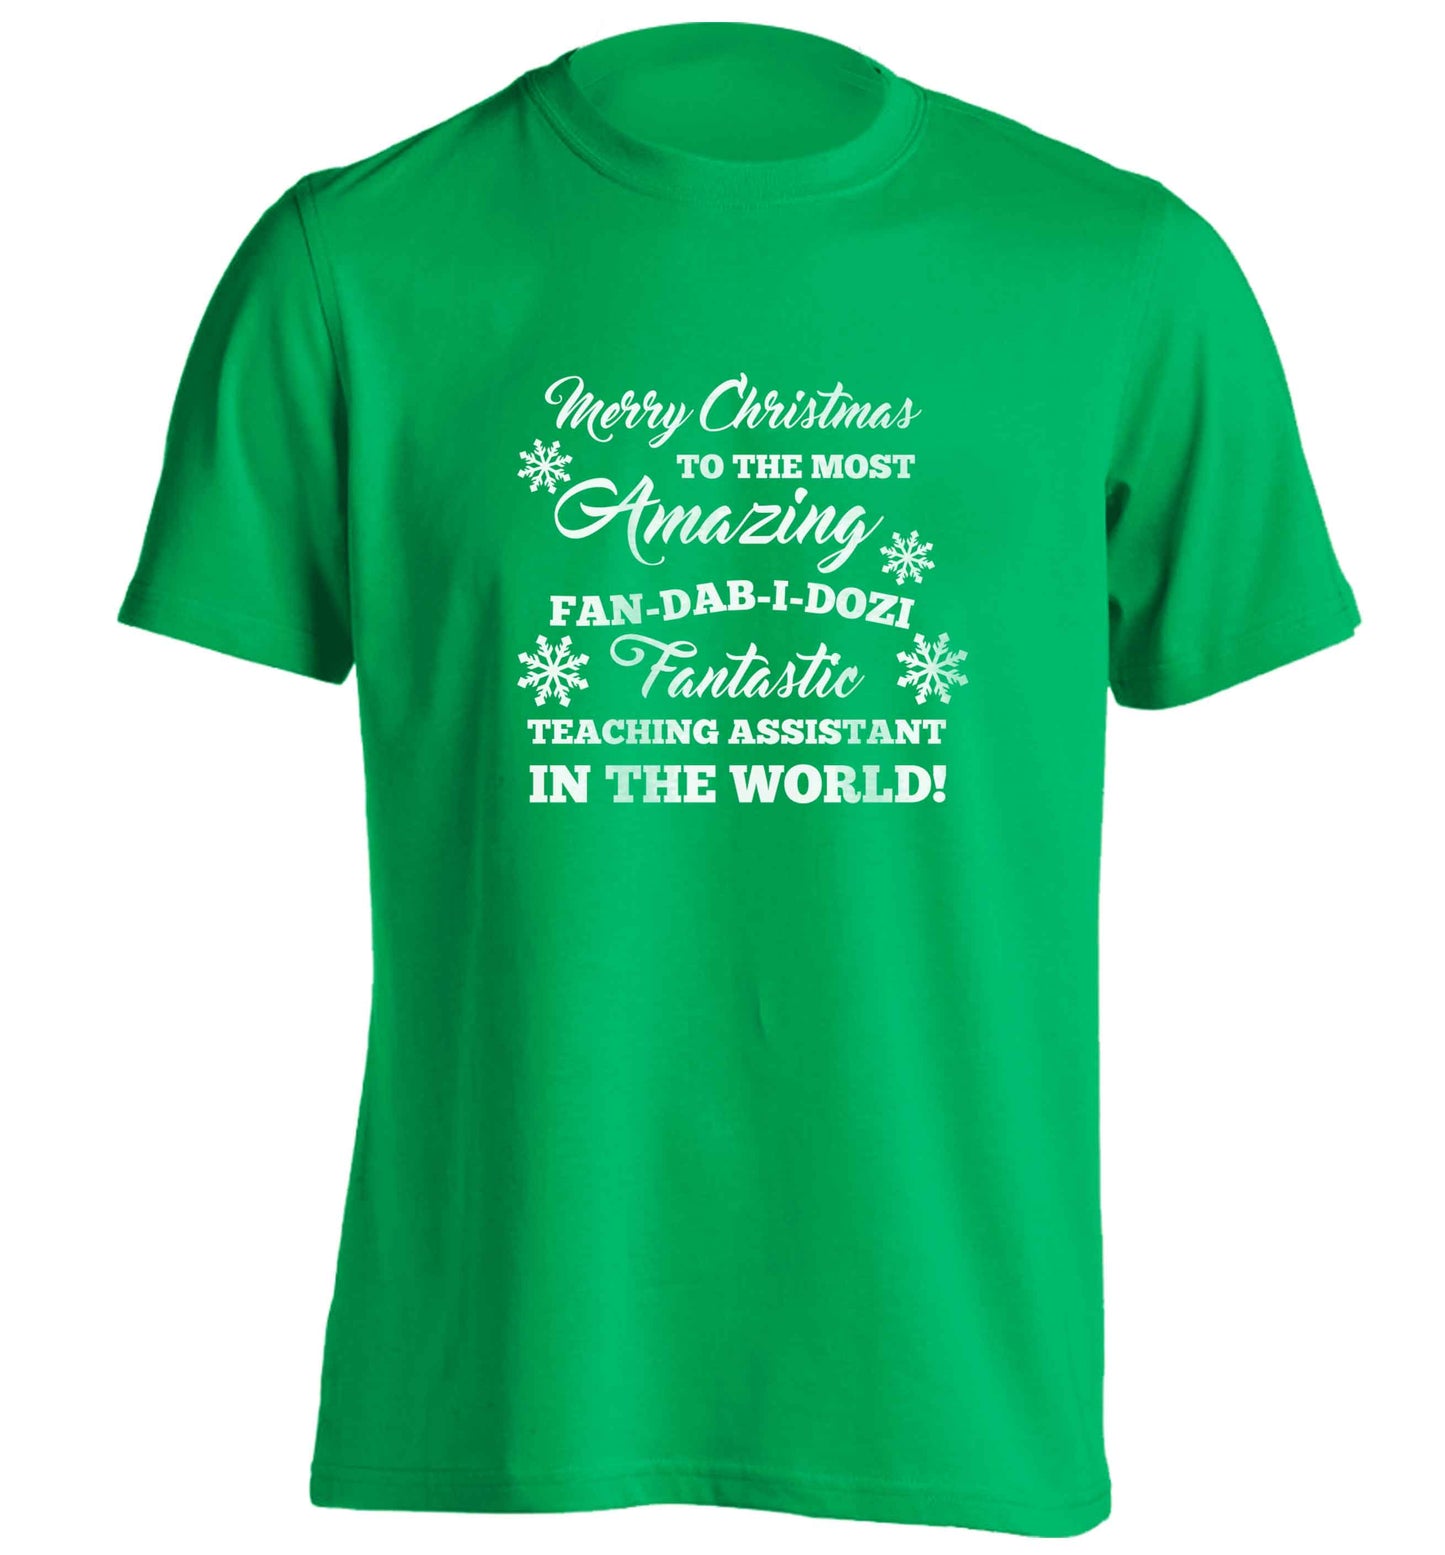 Merry Christmas to the most amazing fan-dab-i-dozi fantasic teaching assistant in the world adults unisex green Tshirt 2XL